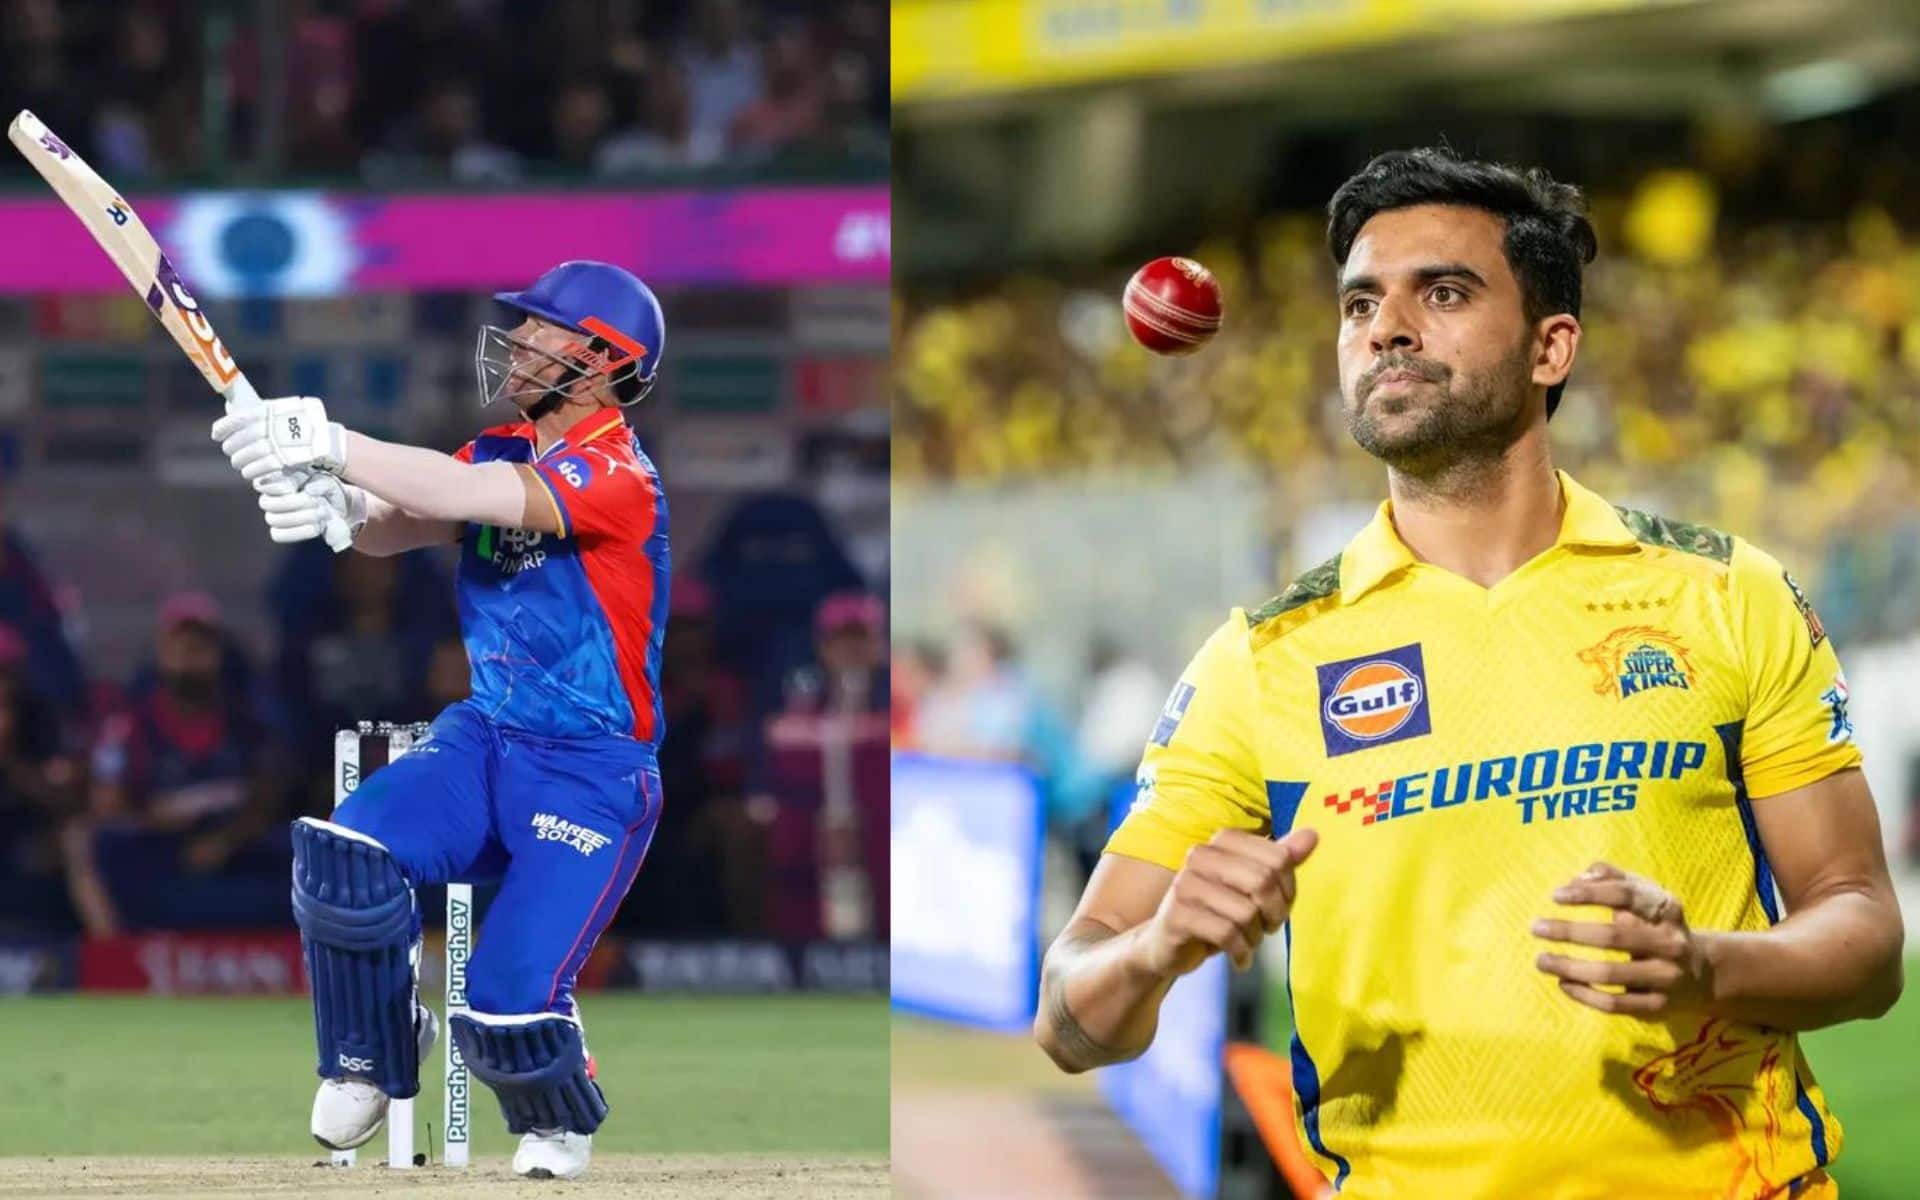 Can Warner Break The Shackles vs Chahar? - Top Player Battles To Watch Out For In DC vs CSK